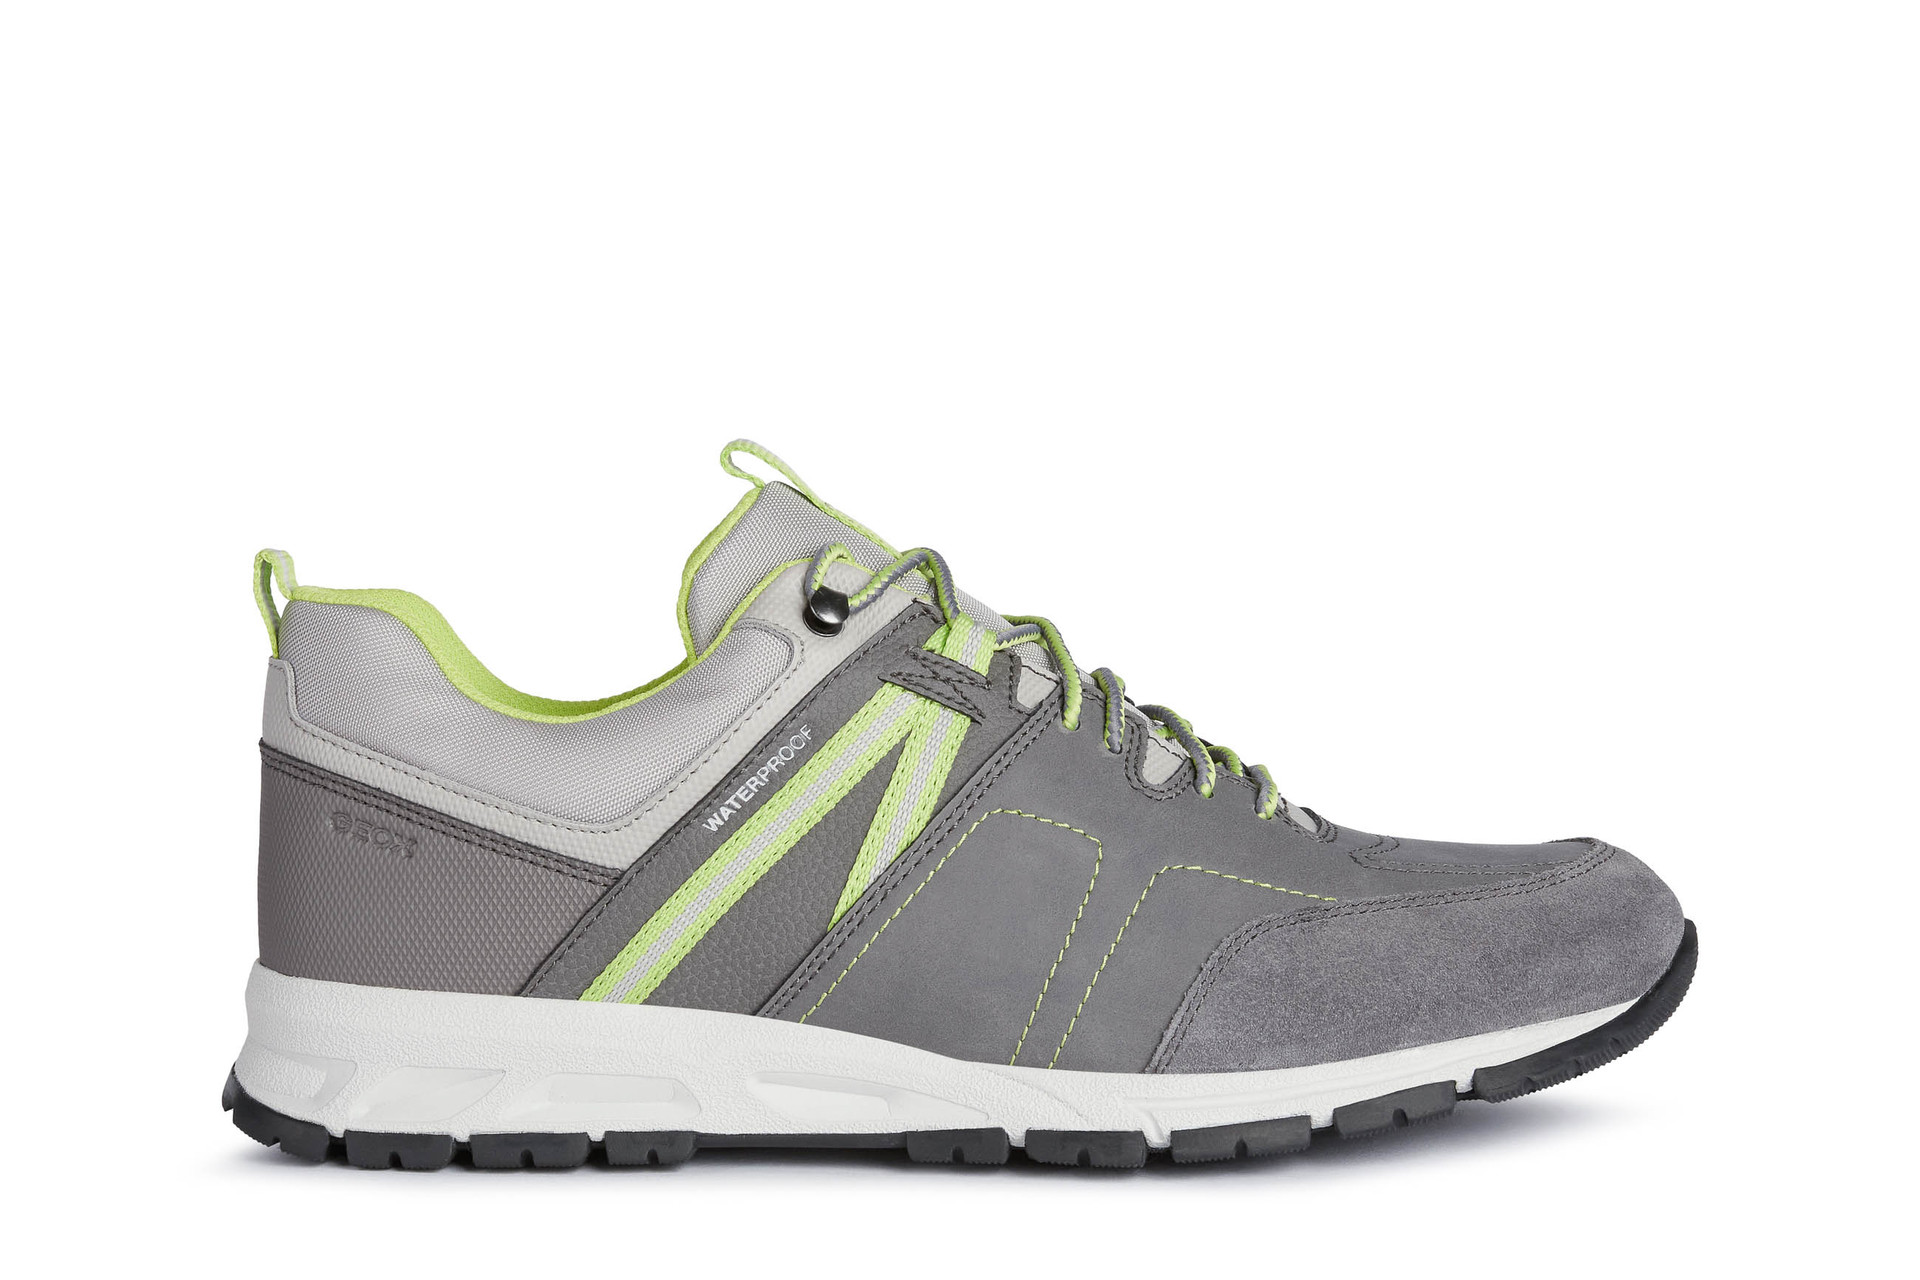 GEOX Delray B - Grey / Light grey Leather/Synthetic